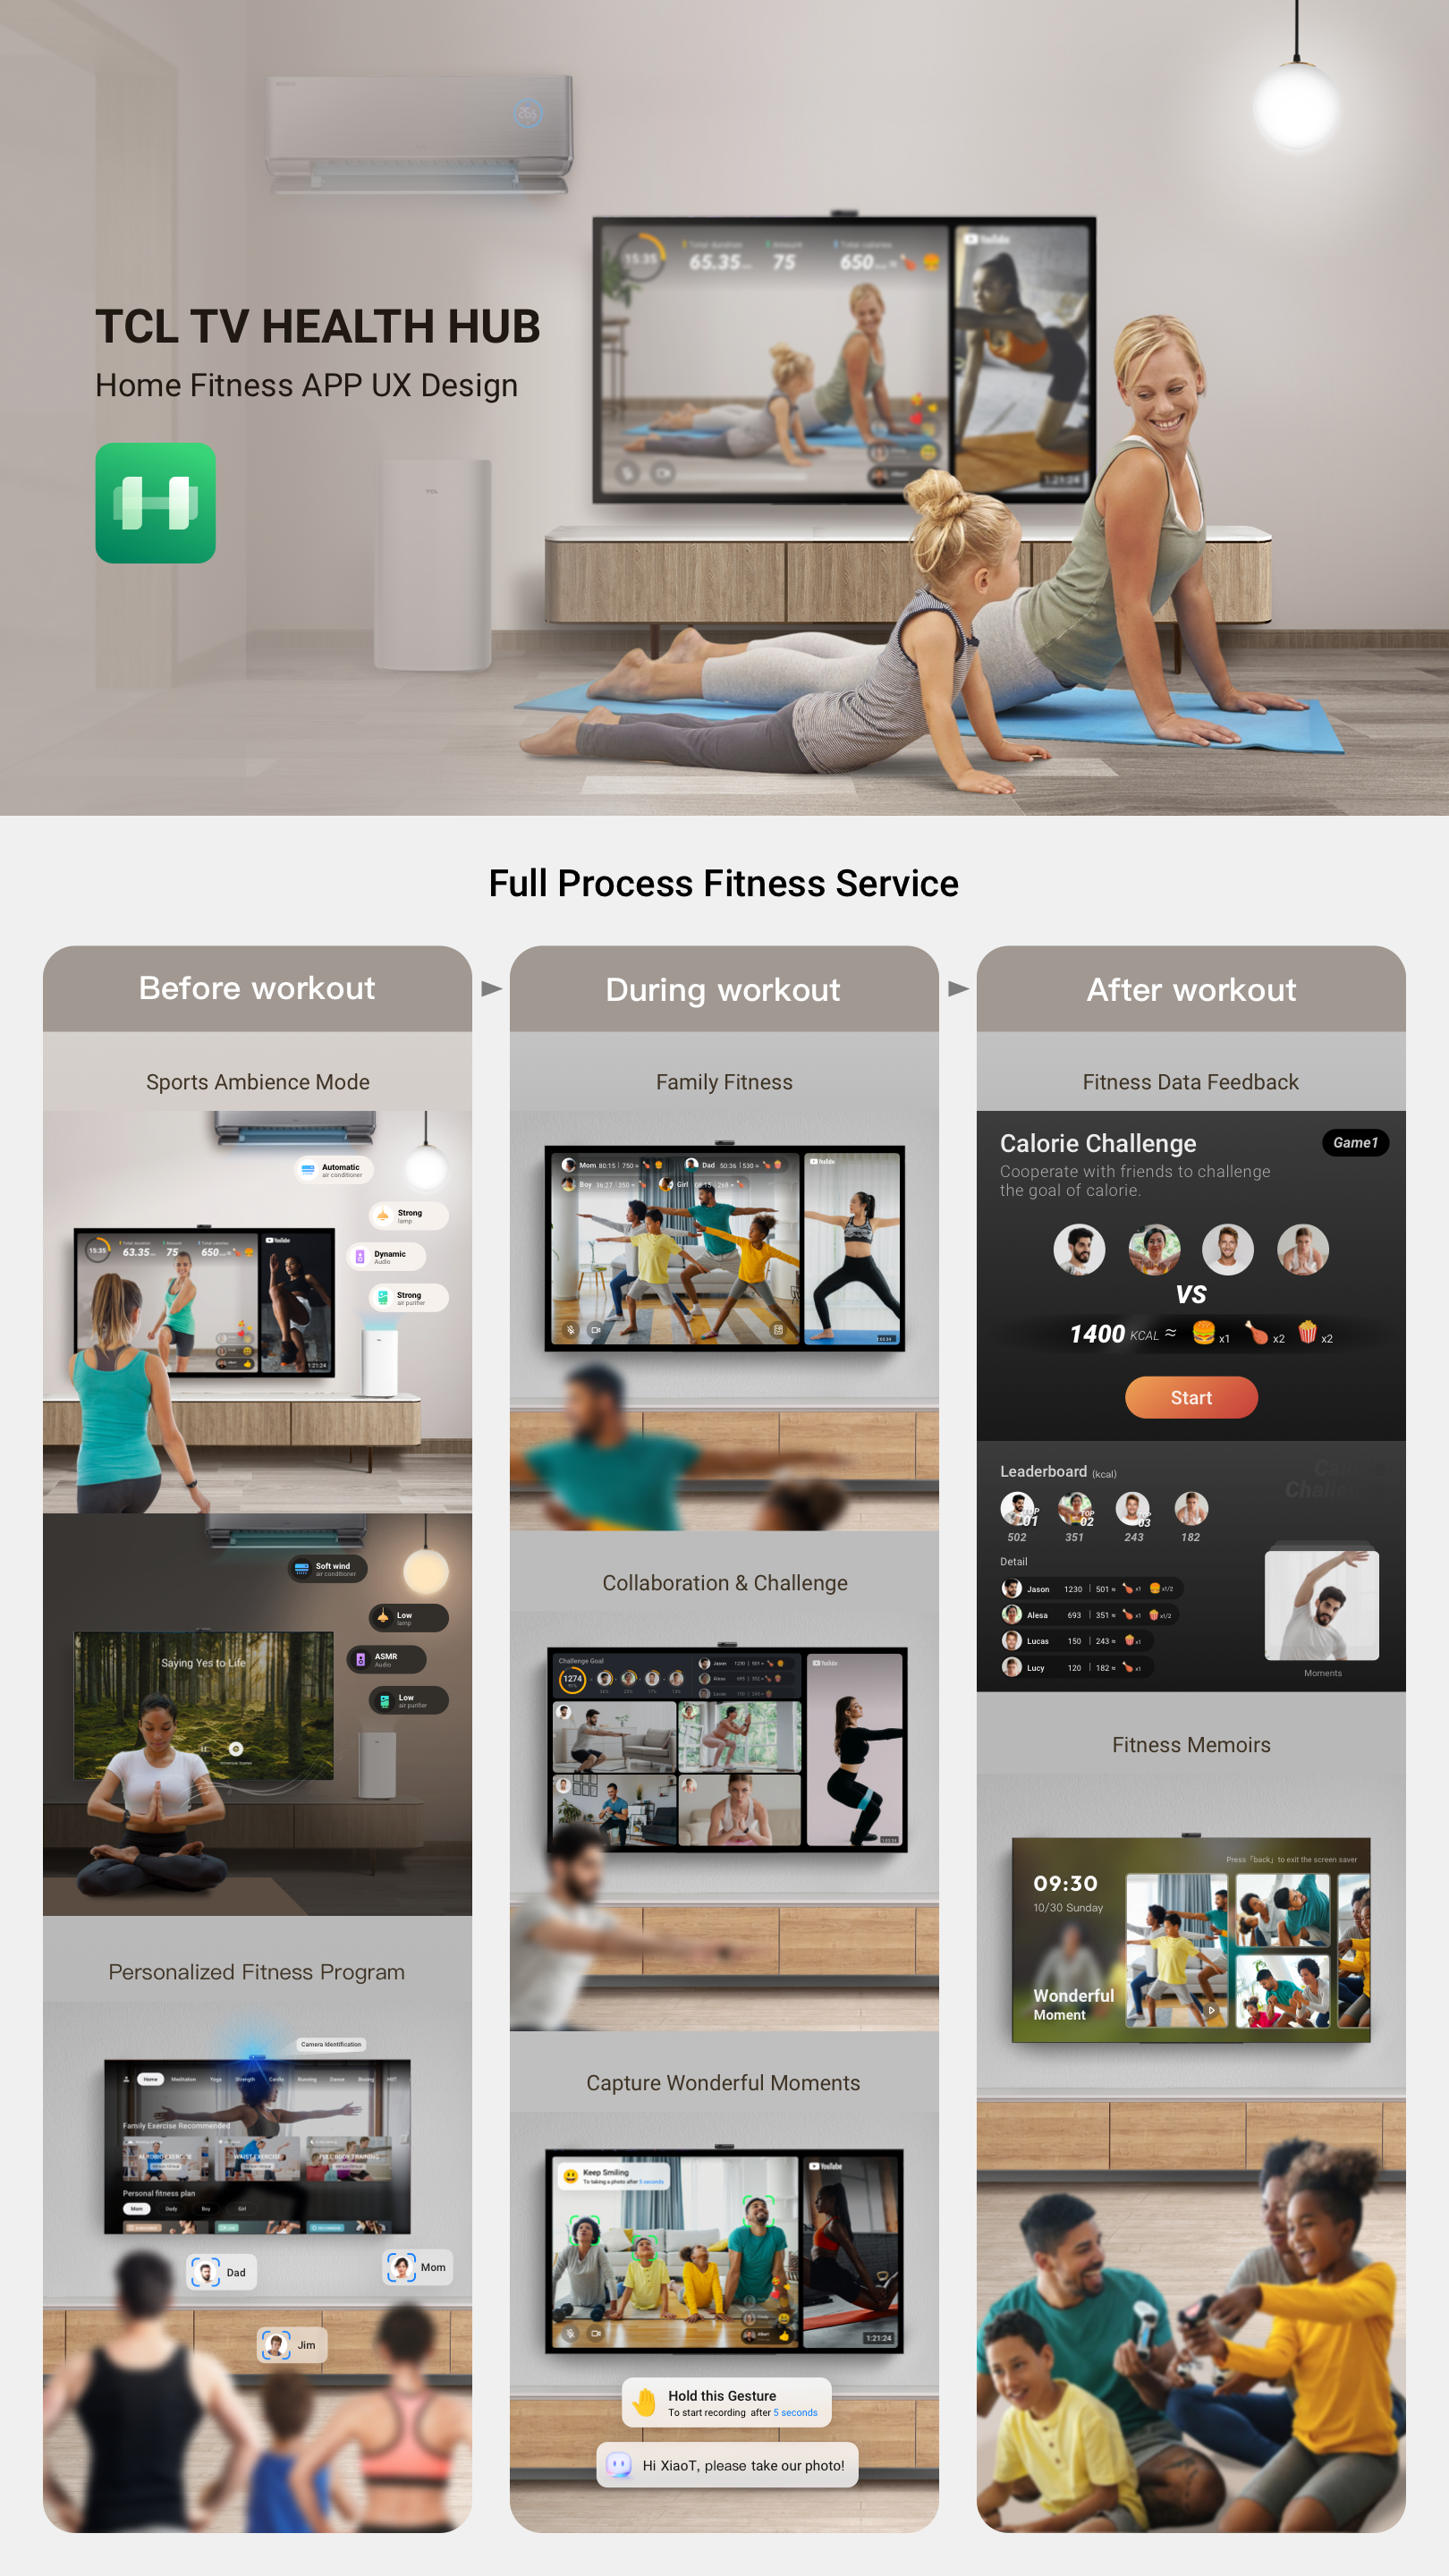 TCL HEALTH HUB - Home Fitness Experience